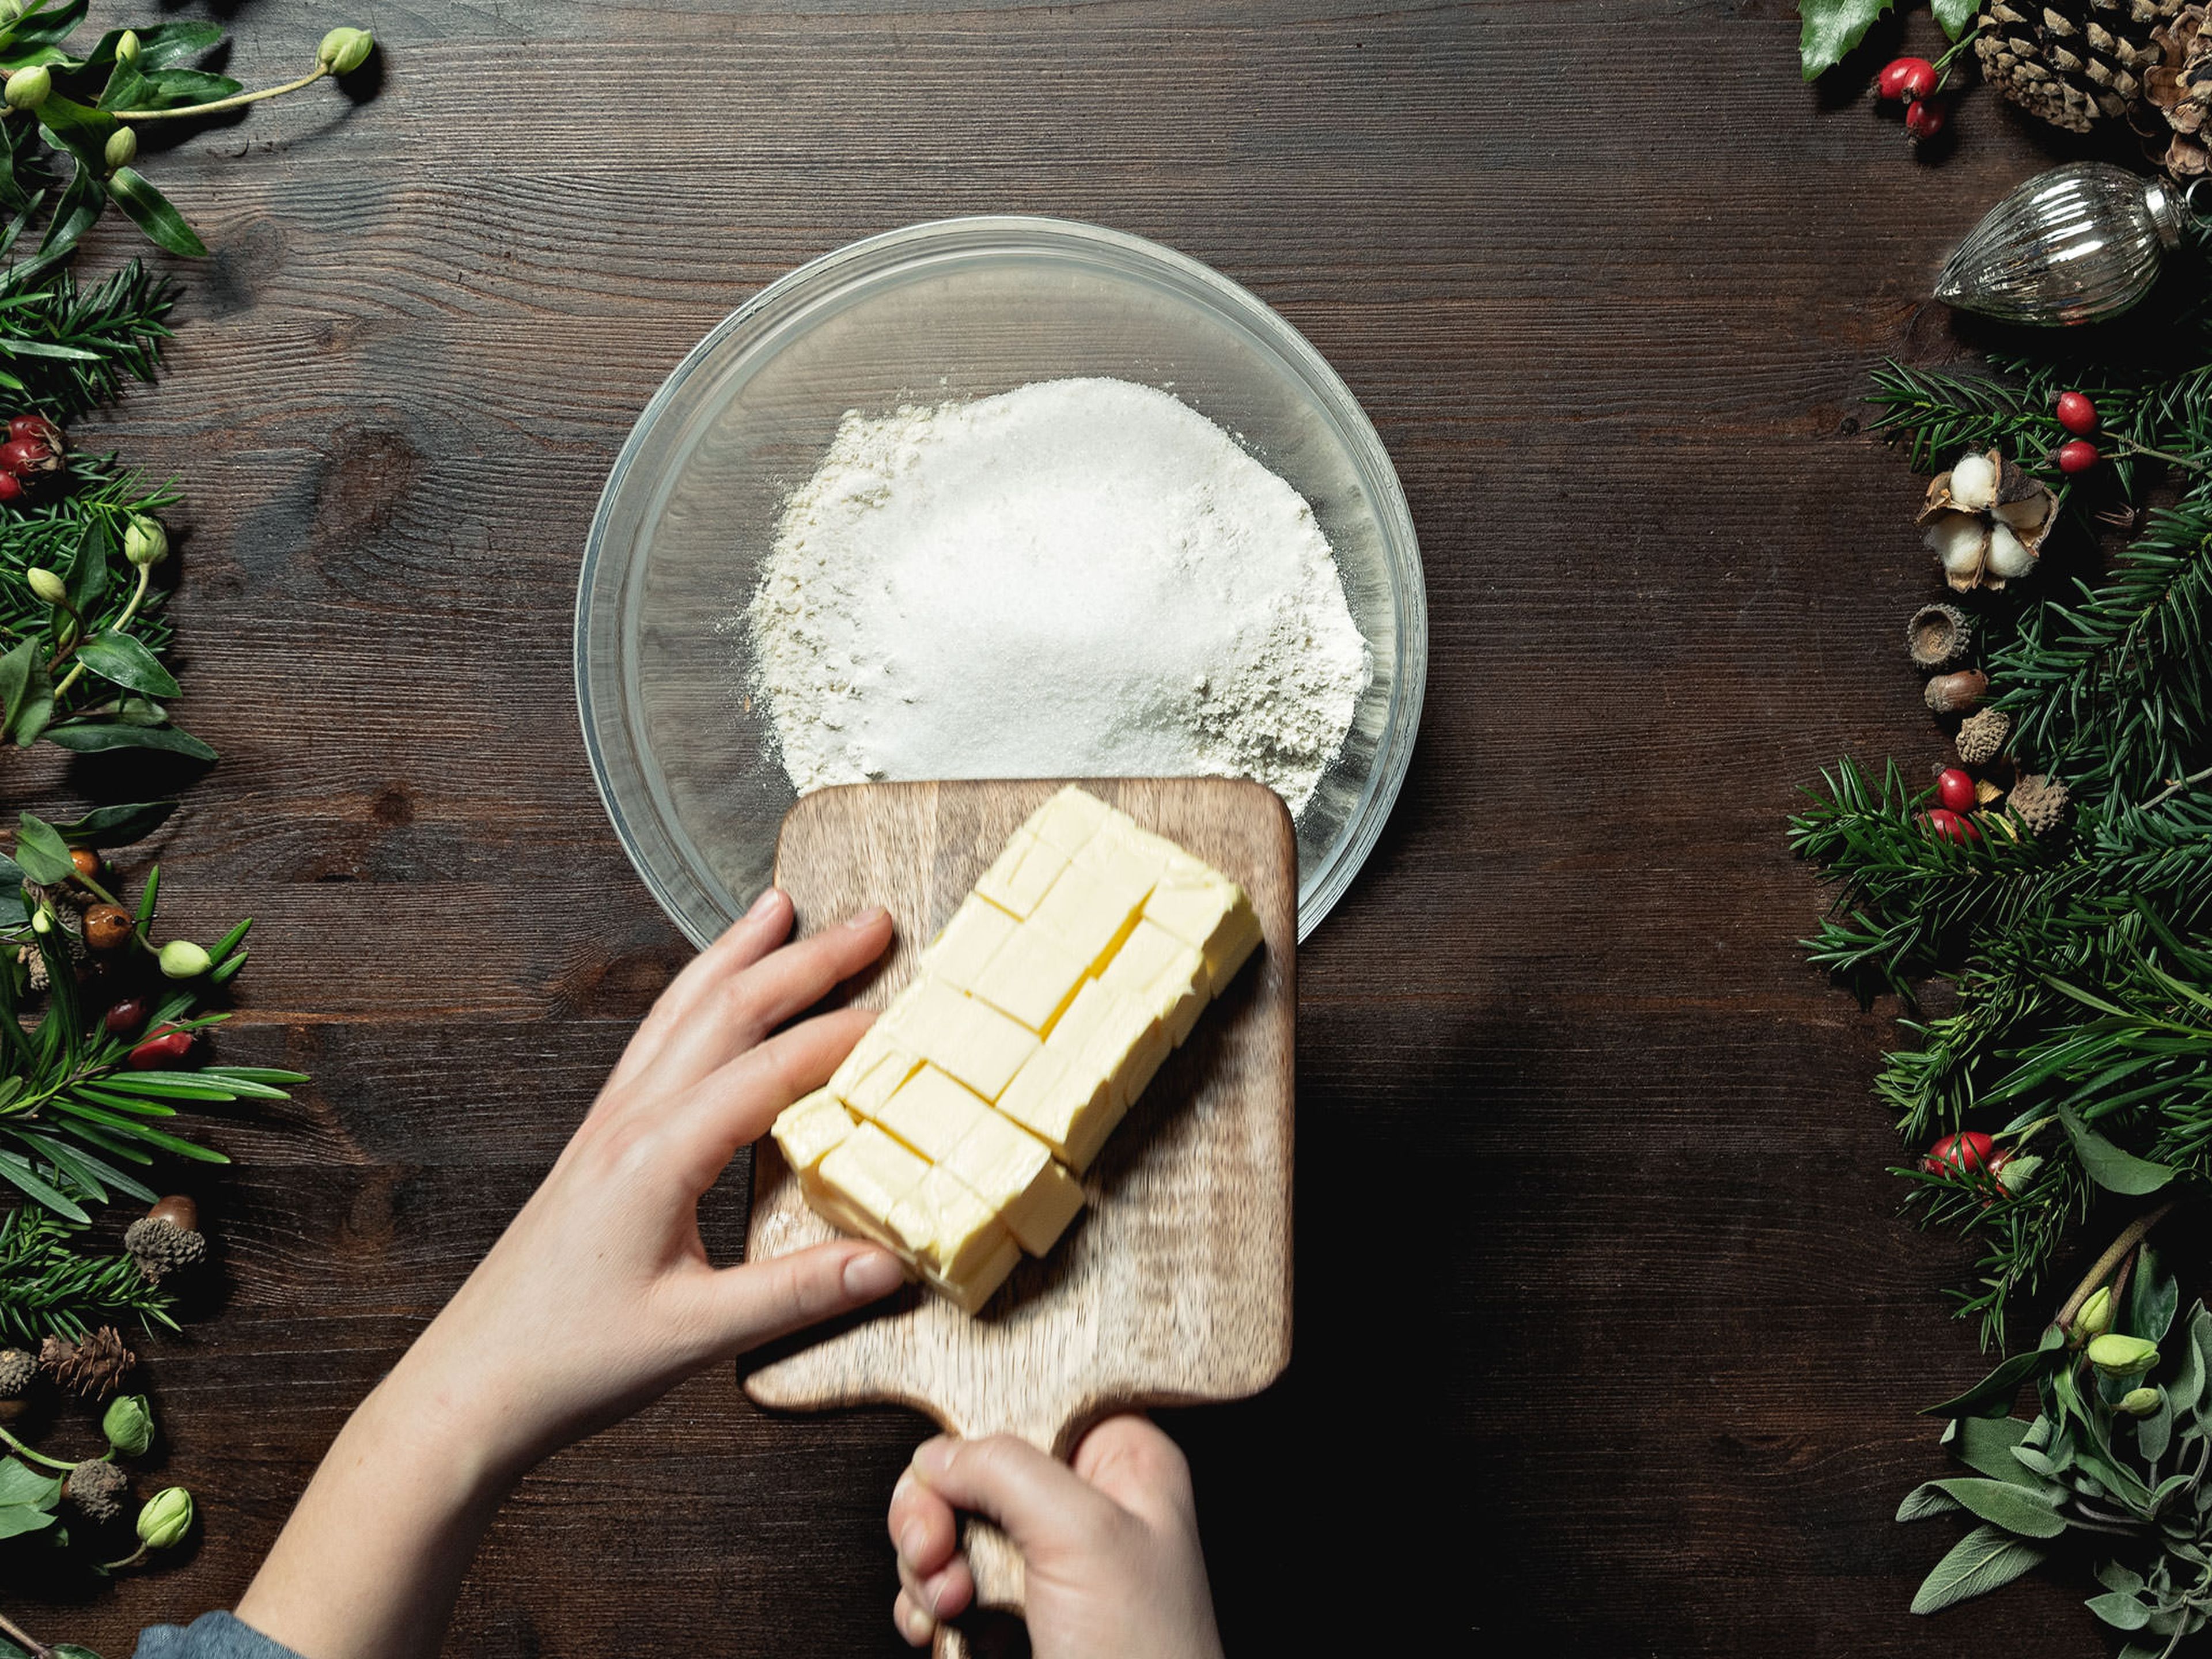 Mix flour, sugar, and salt in a bowl. Add cold, cubed butter and work it in with your hands to a crumbly dough. Add the egg and mix well to combine. Wrap in plastic and let chill for approx. 1 hr.